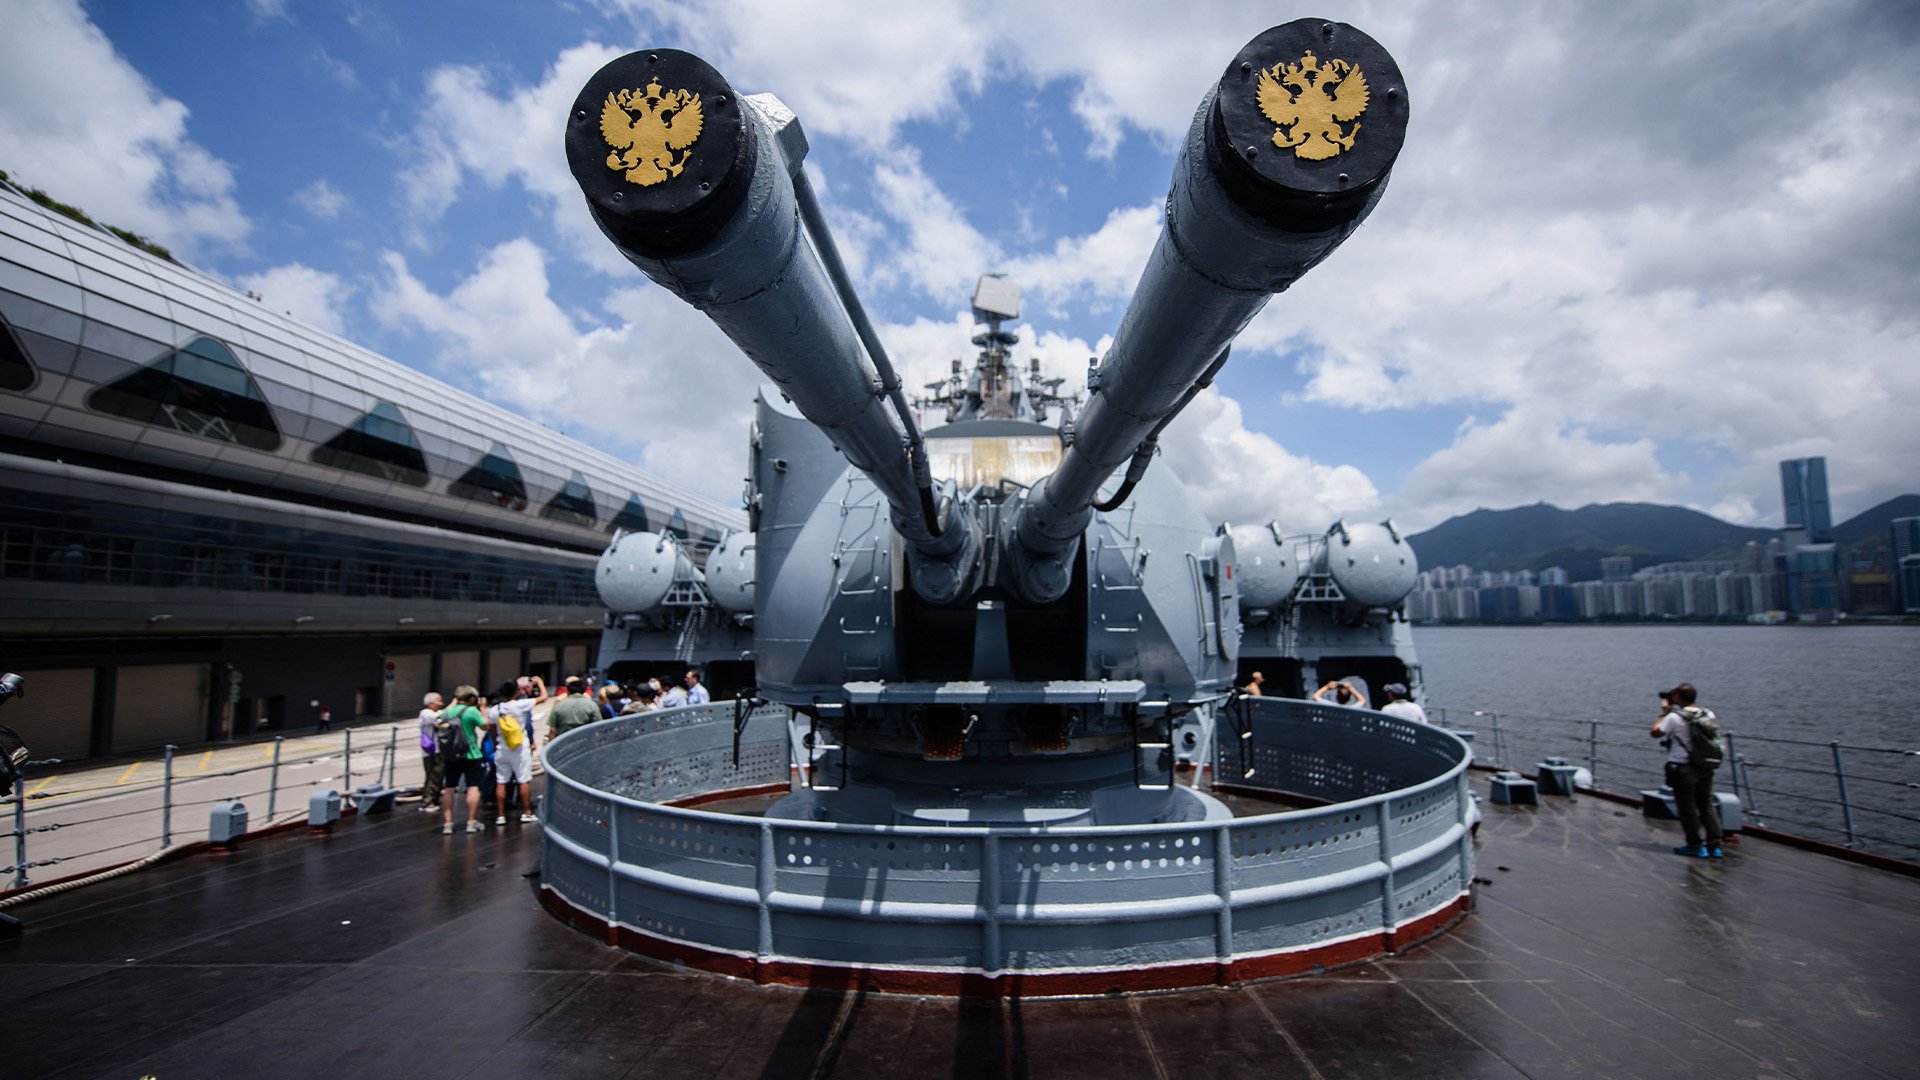 A gun turret is seen on the deck of the Russian guided-missile cruiser Varyag in Hong Kong on June 5, 2017. The vessel is the flagship of a Russian flotilla participating in war games that kicked off with Chinese forces in the East China Sea on Dec. 21, 2022. Photo by Anthony Wallace/ AFP via Getty Images.